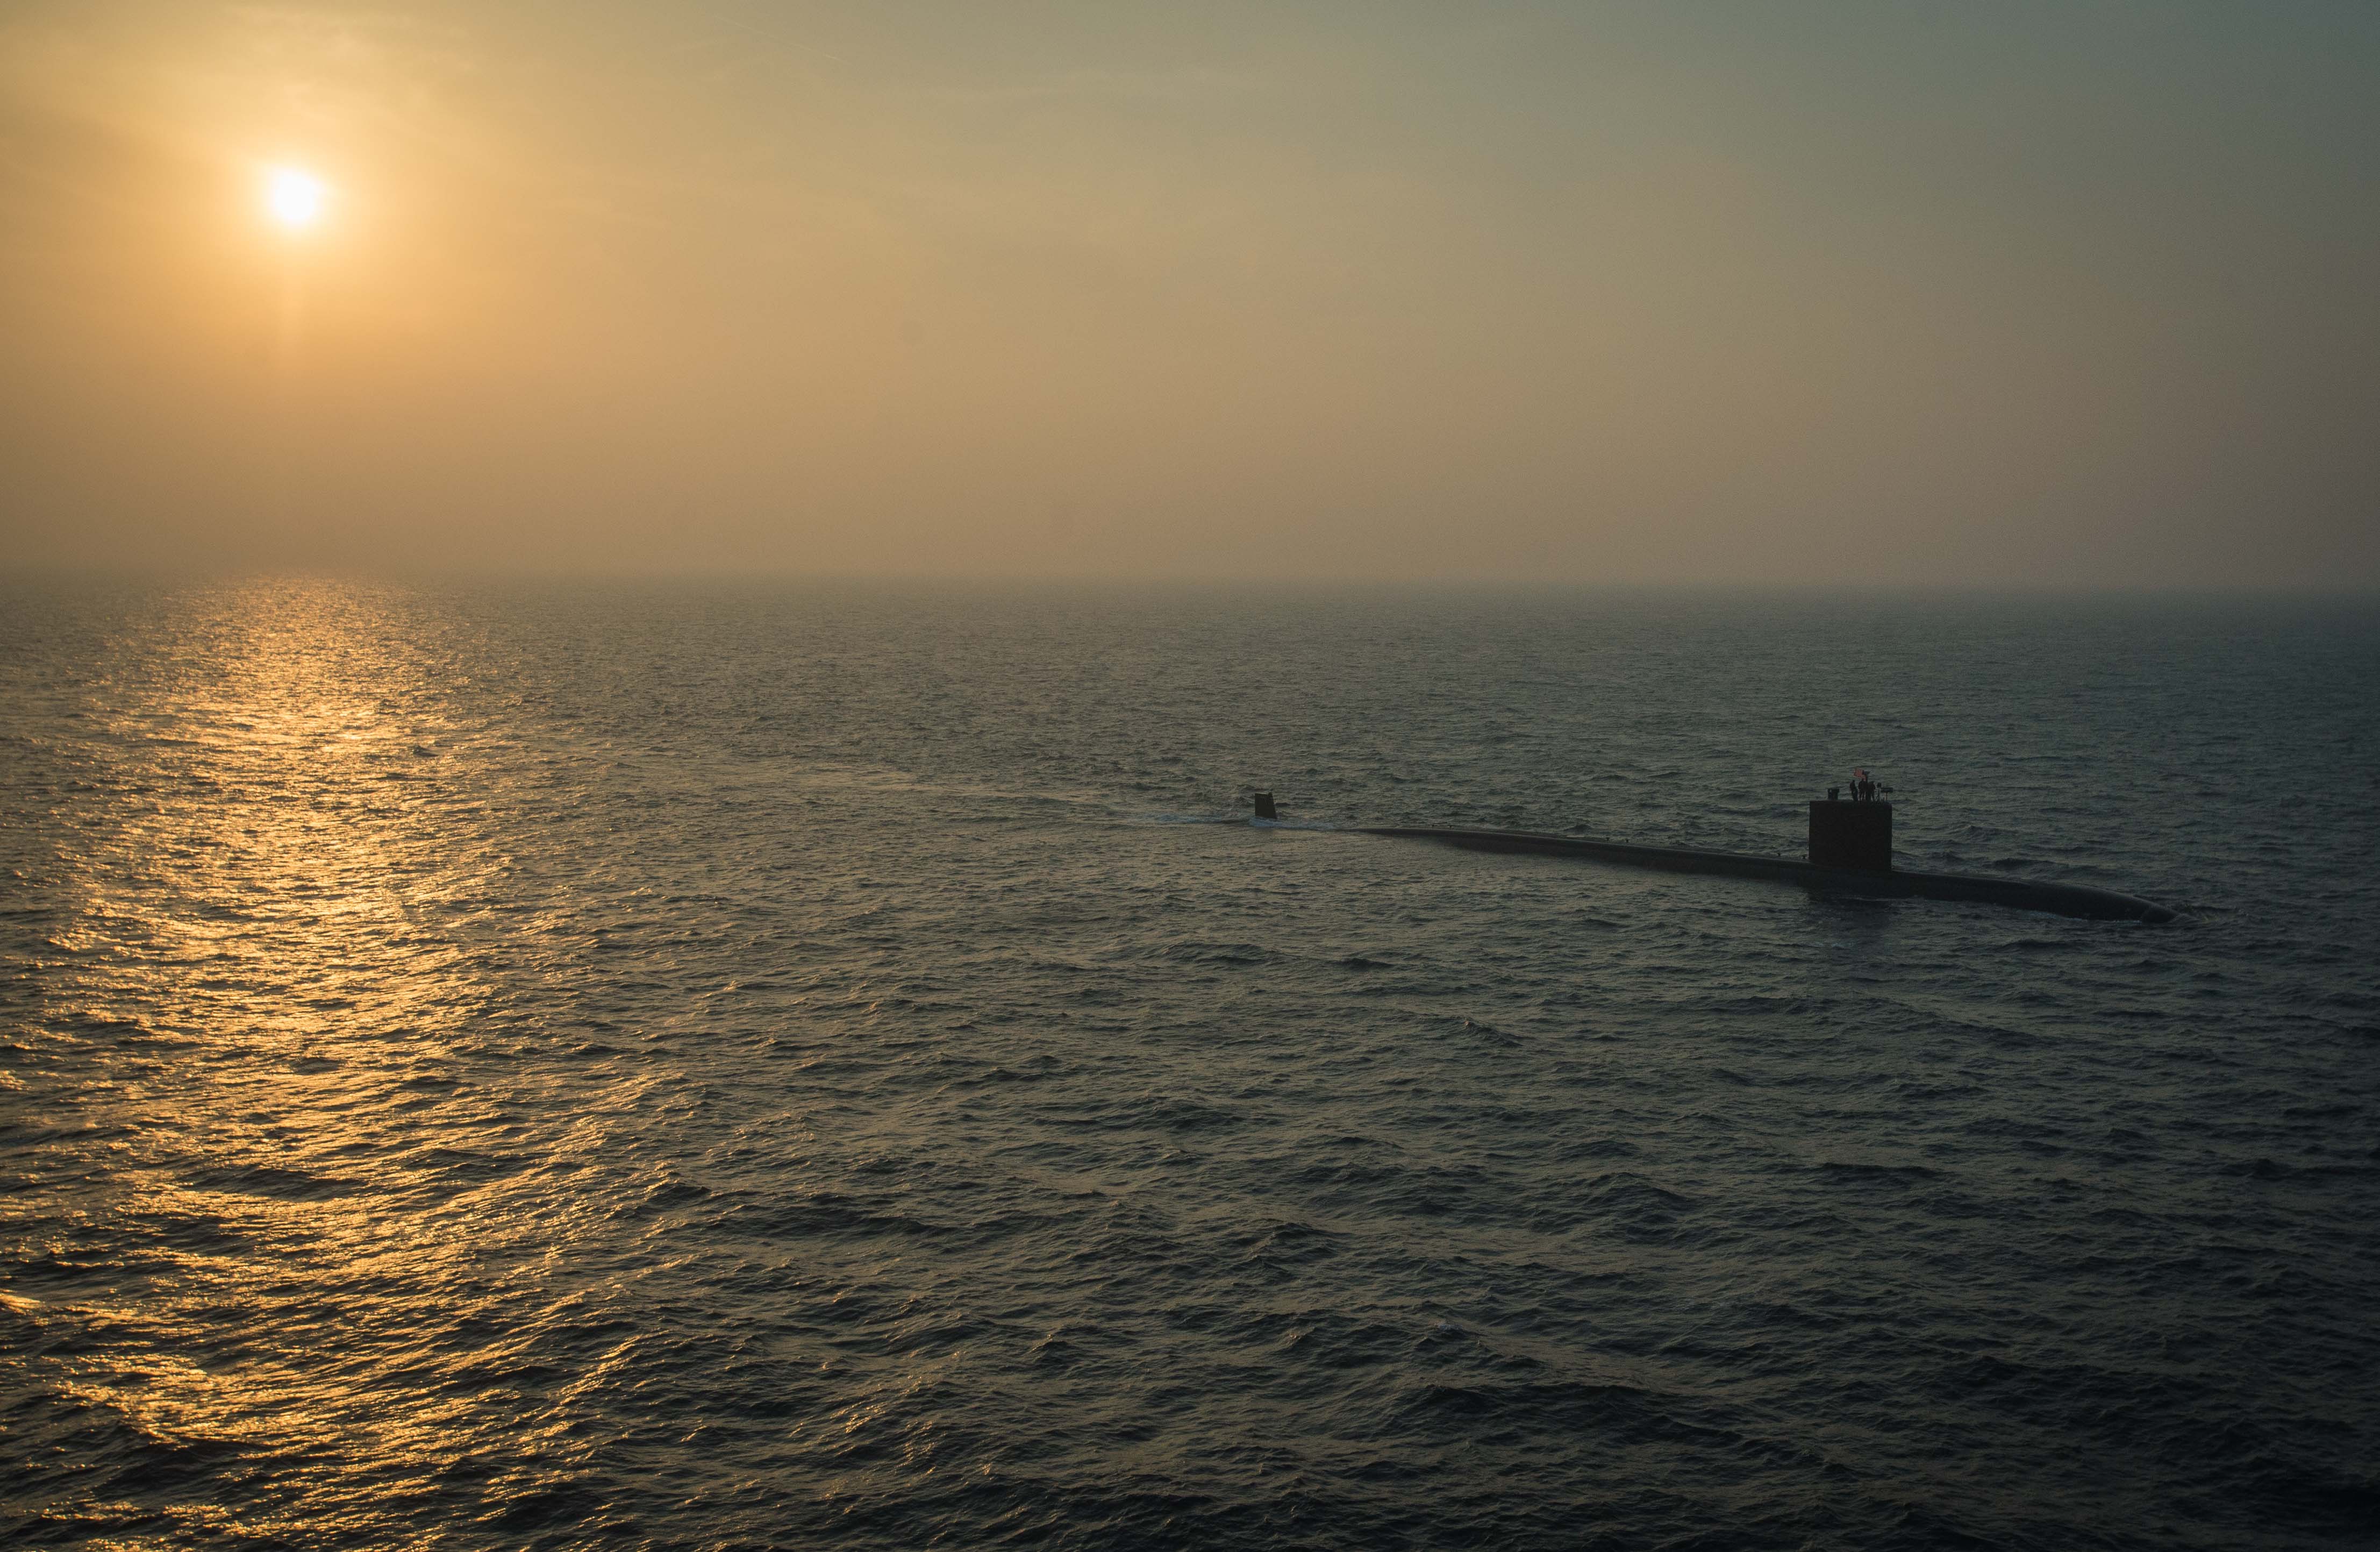 The Los Angeles-class fast attack submarine USS Toledo (SSN 769), assigned to Commander, Task Force (CTF) 54, transits through the Arabian Gulf on Jan. 21, 2016. US Navy photo.